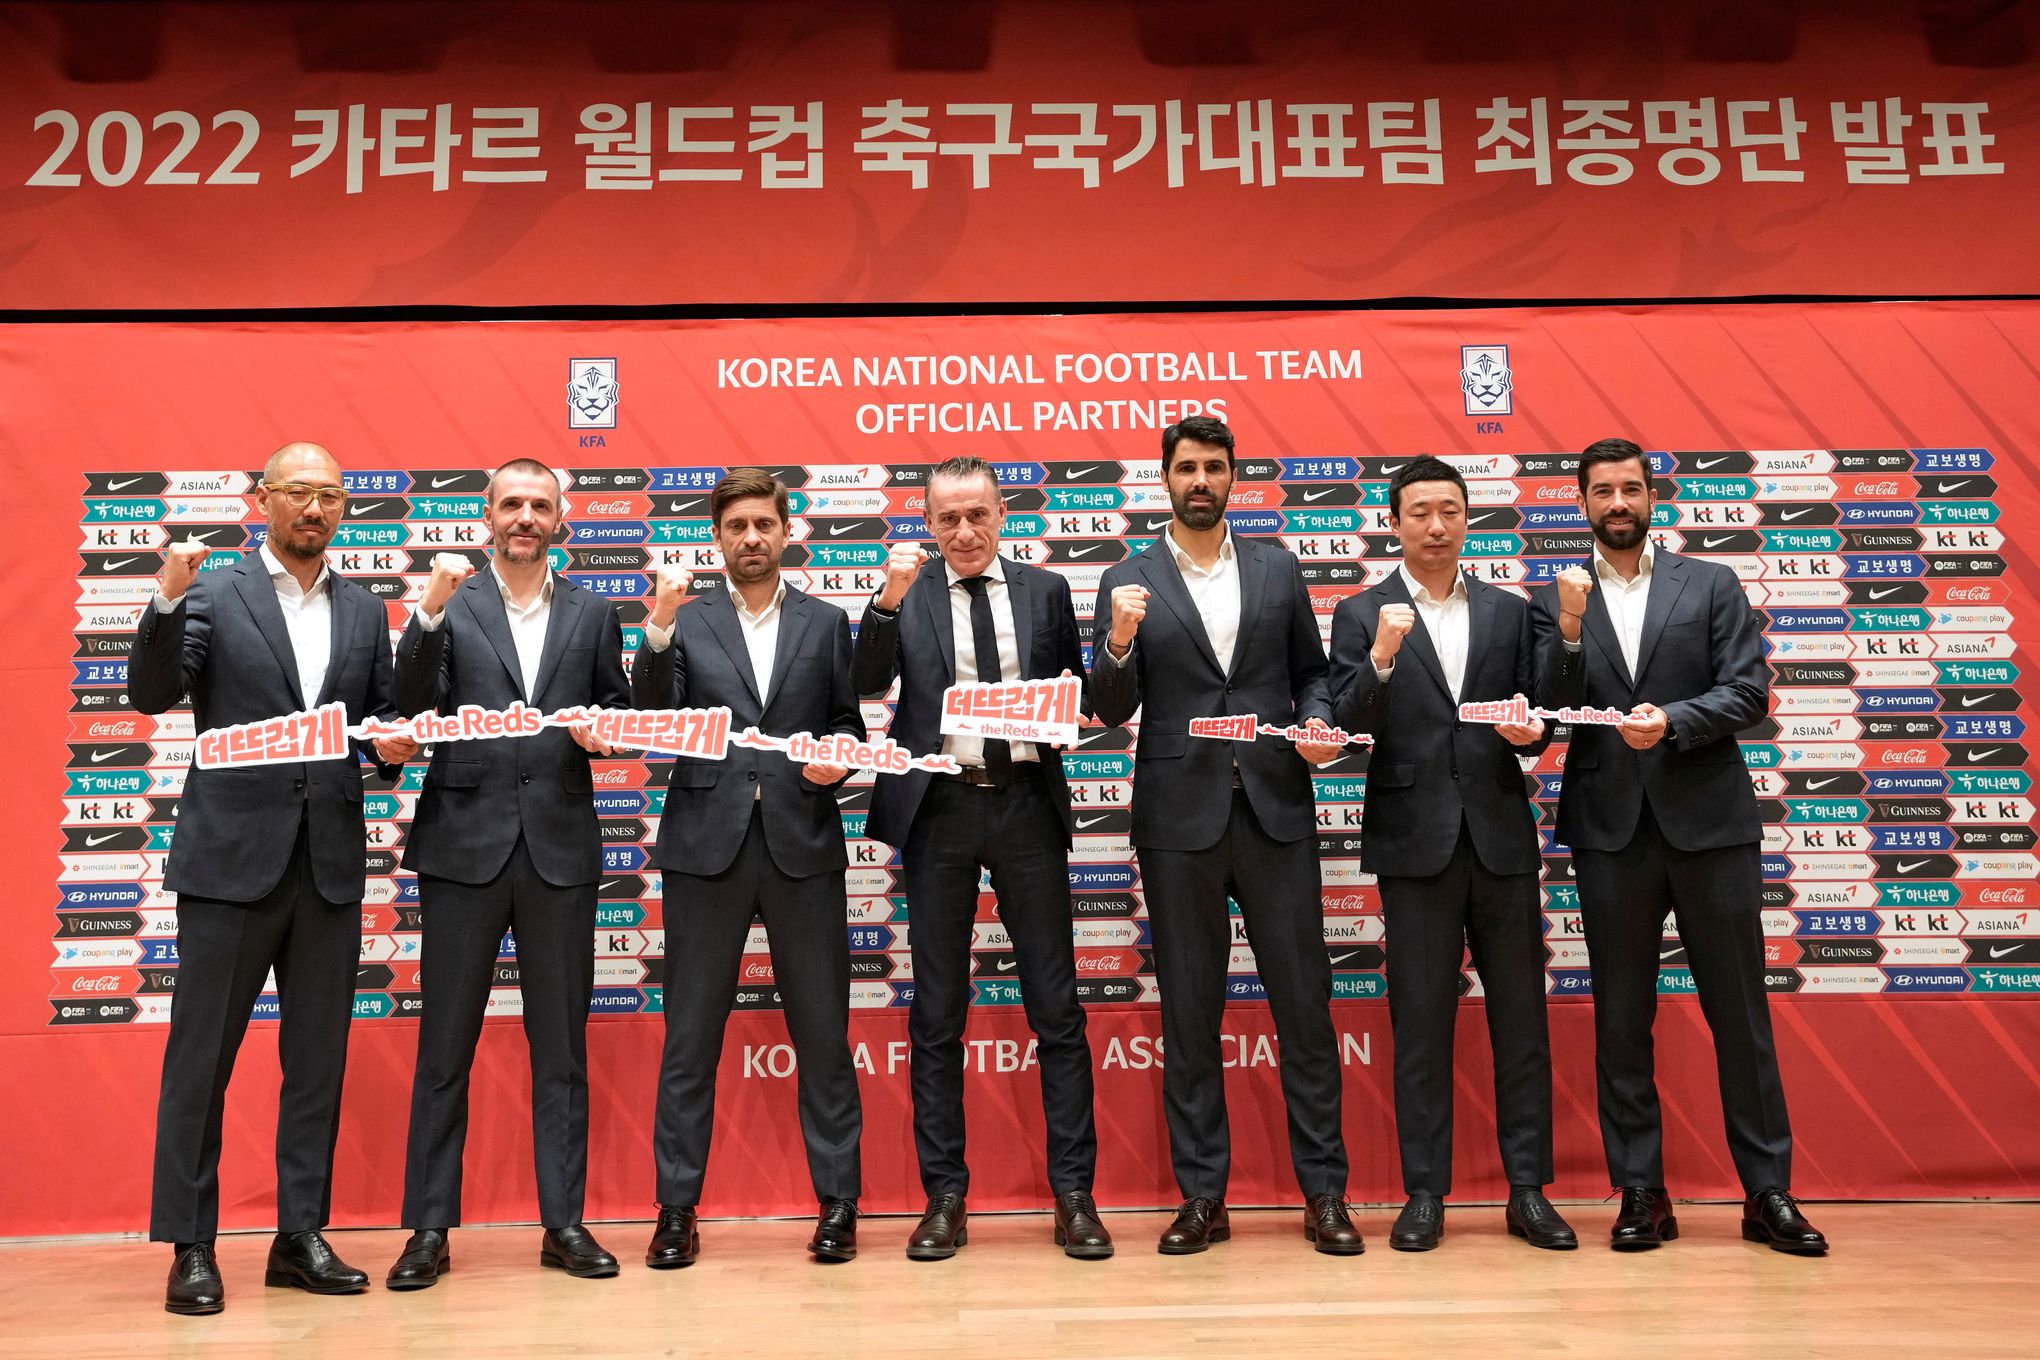 South Korea World Cup squad includes star Son Heung-Min